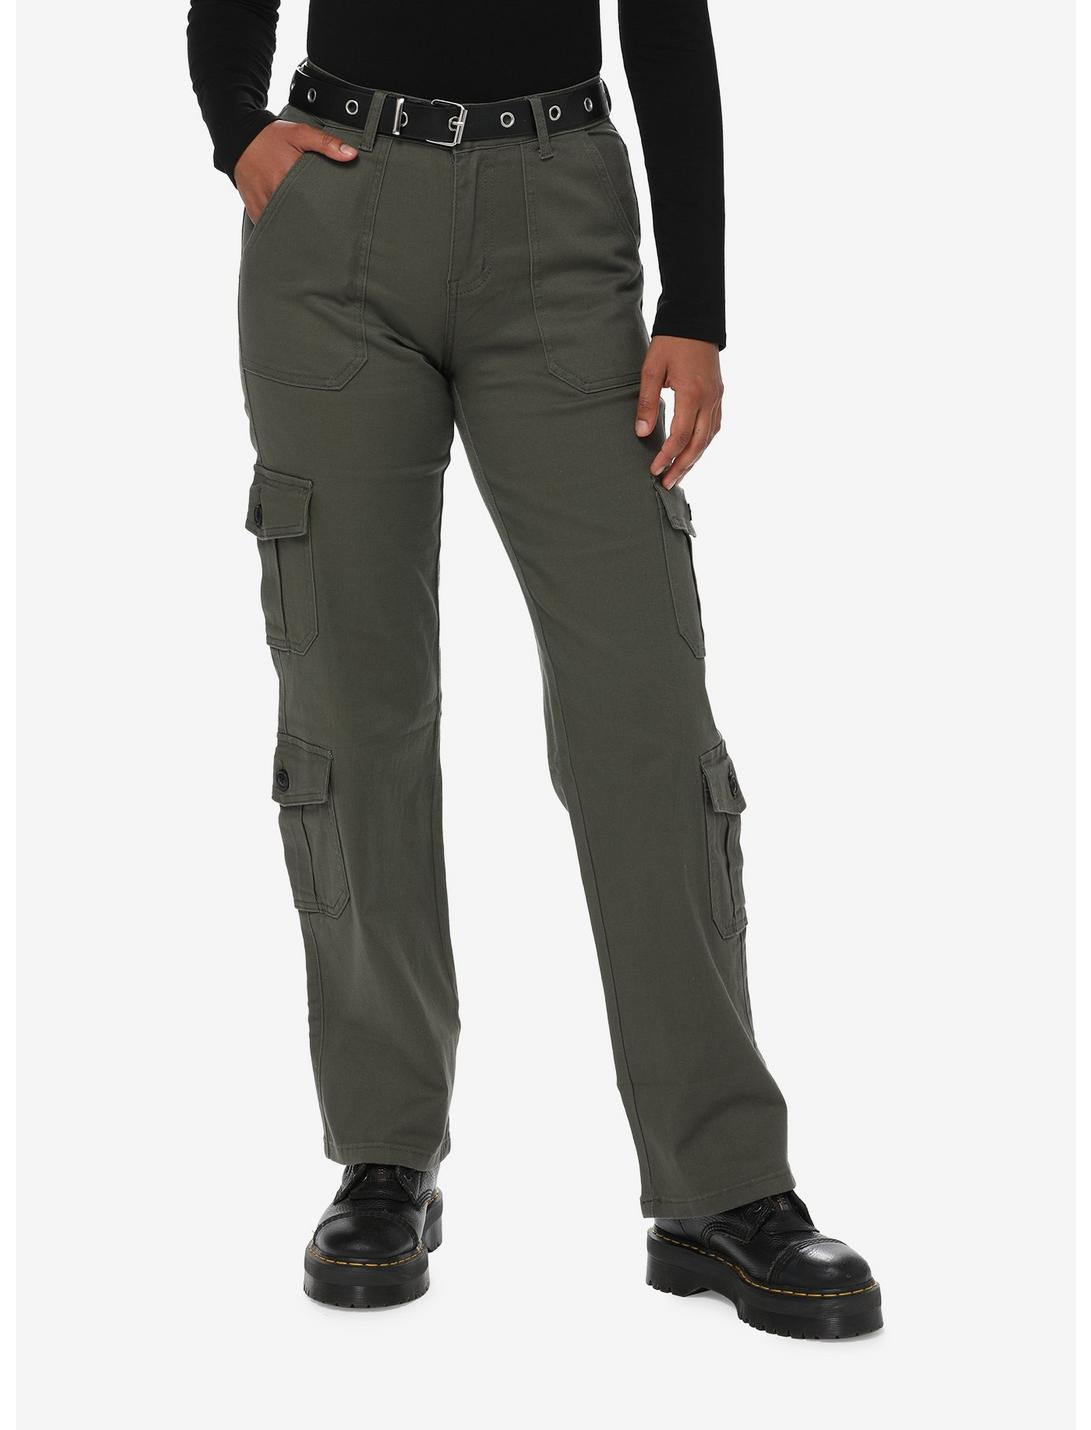 Social Collision Olive Cargo Pants With Belt, GREEN, hi-res